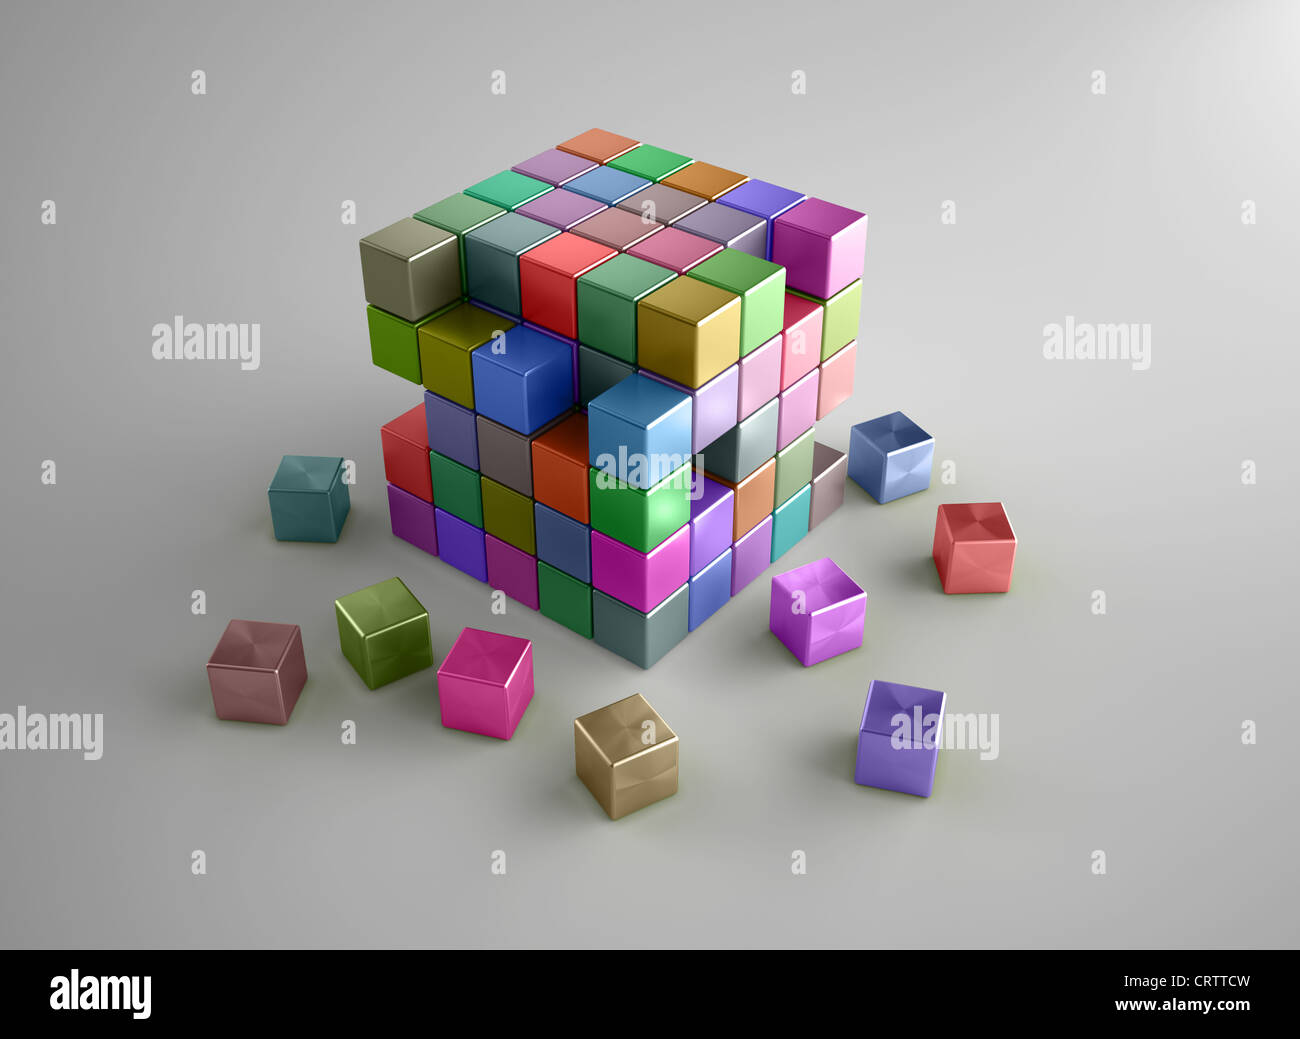 Set of crumbling colorful cubes Stock Photo